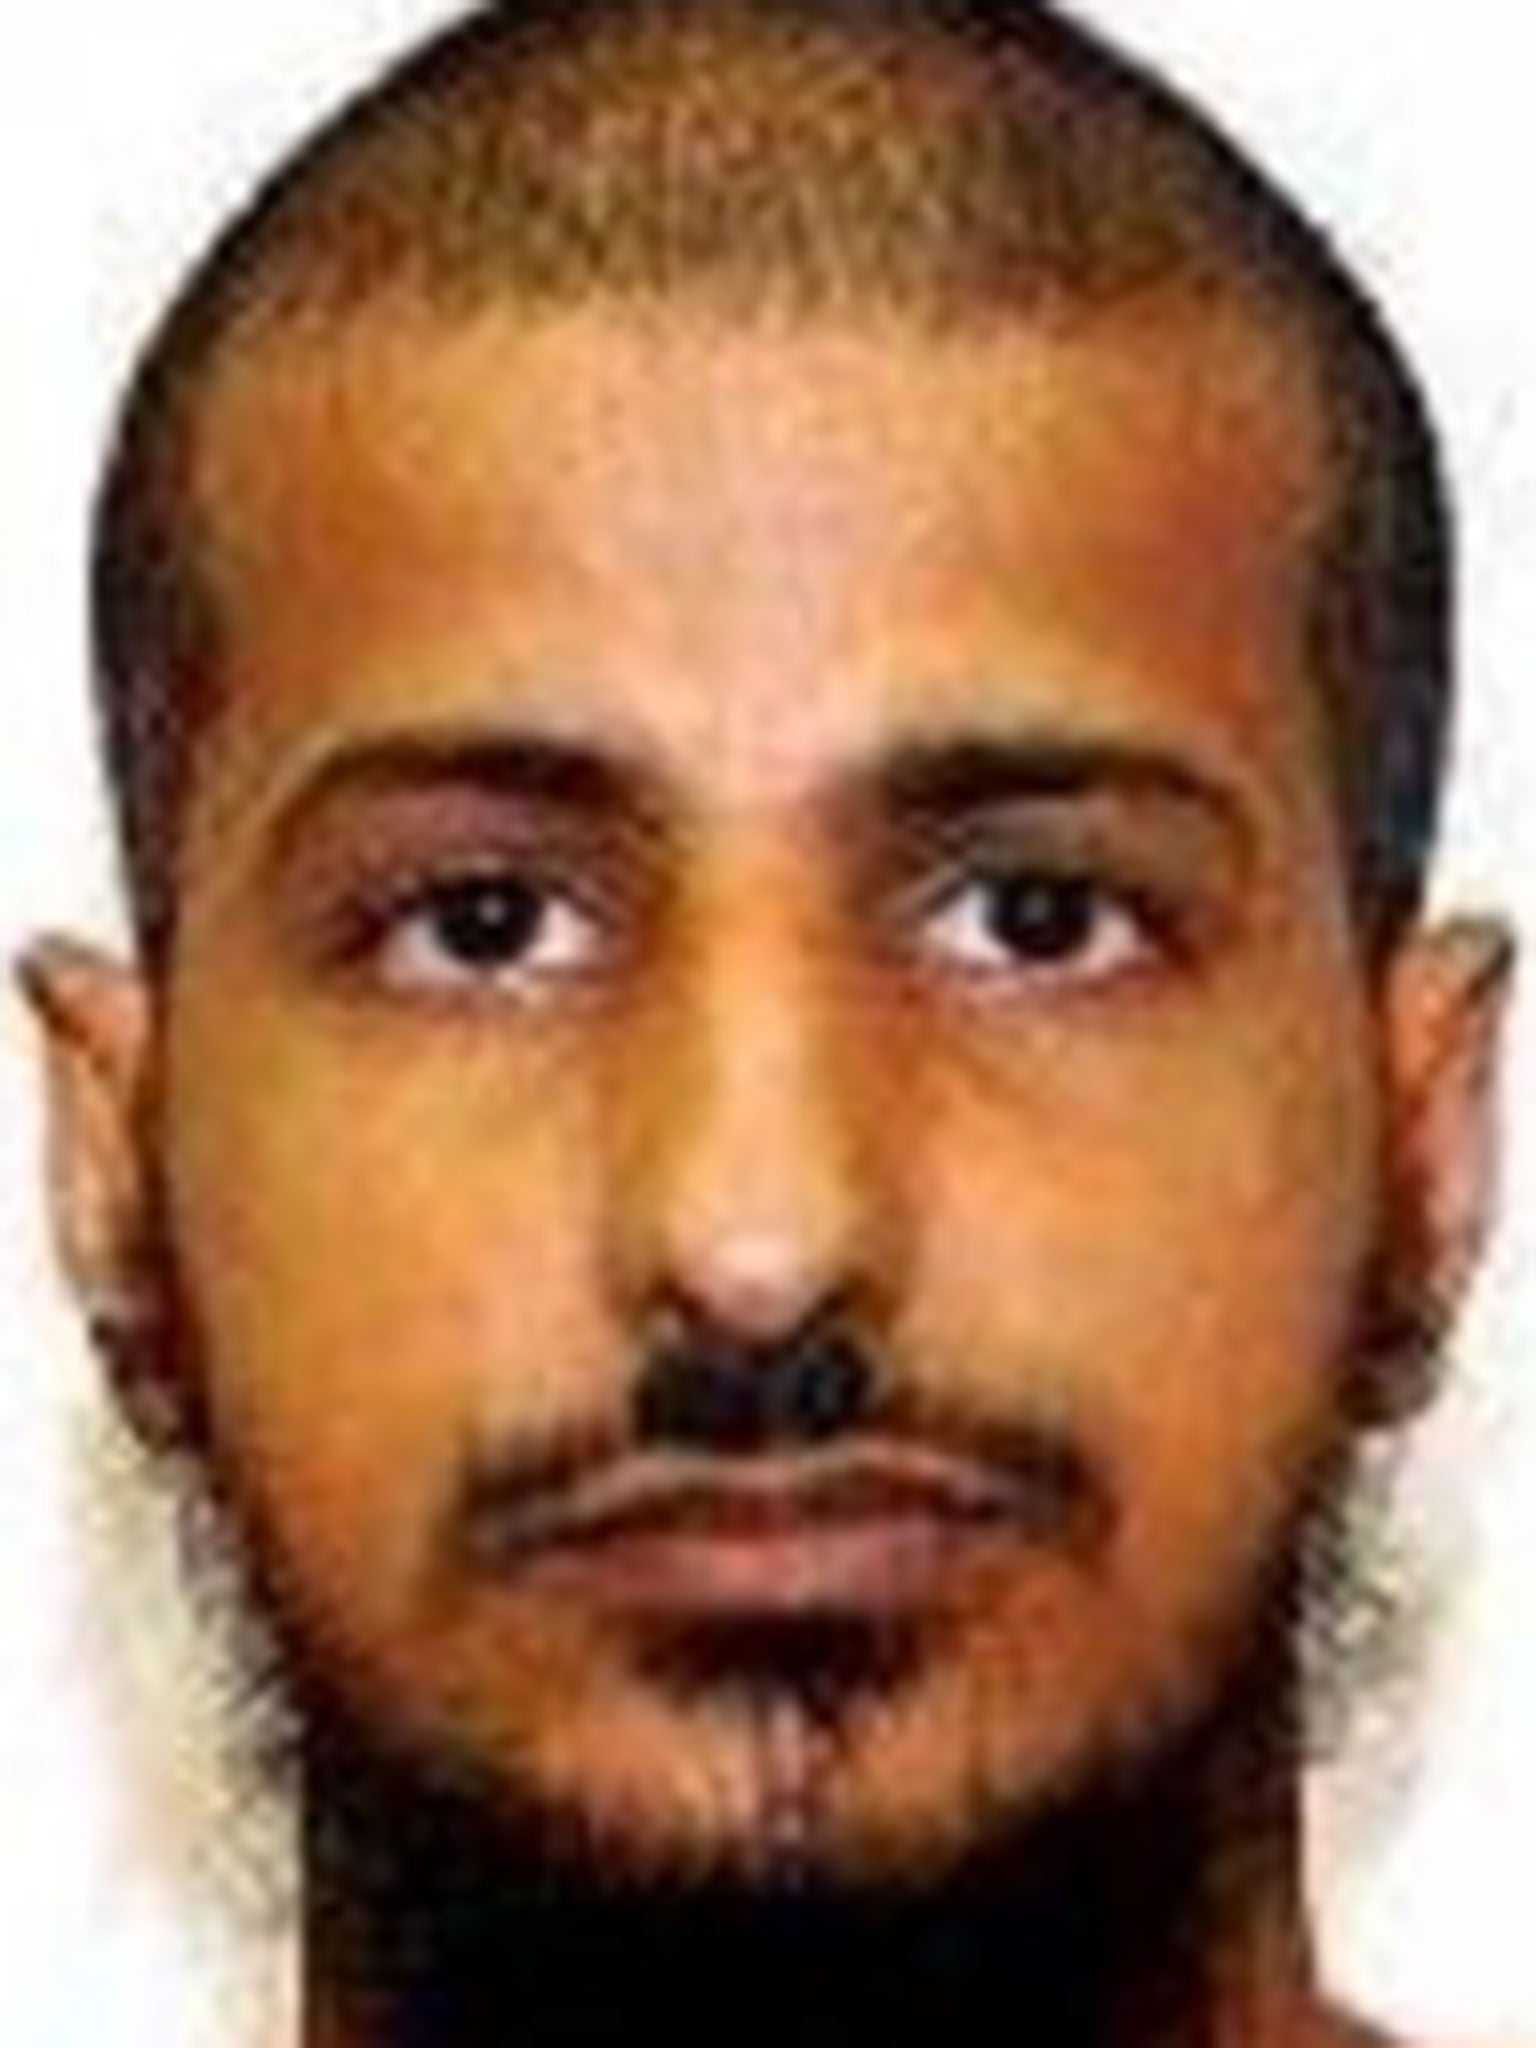 Yemeni Guantanamo Bay detainee Tariq Ba Odah is seen in a US military image taken from a classified Department of Defense Guantanamo 'detainee assessment' prepared in January 2008 and released by WikiLeaks in April 2011